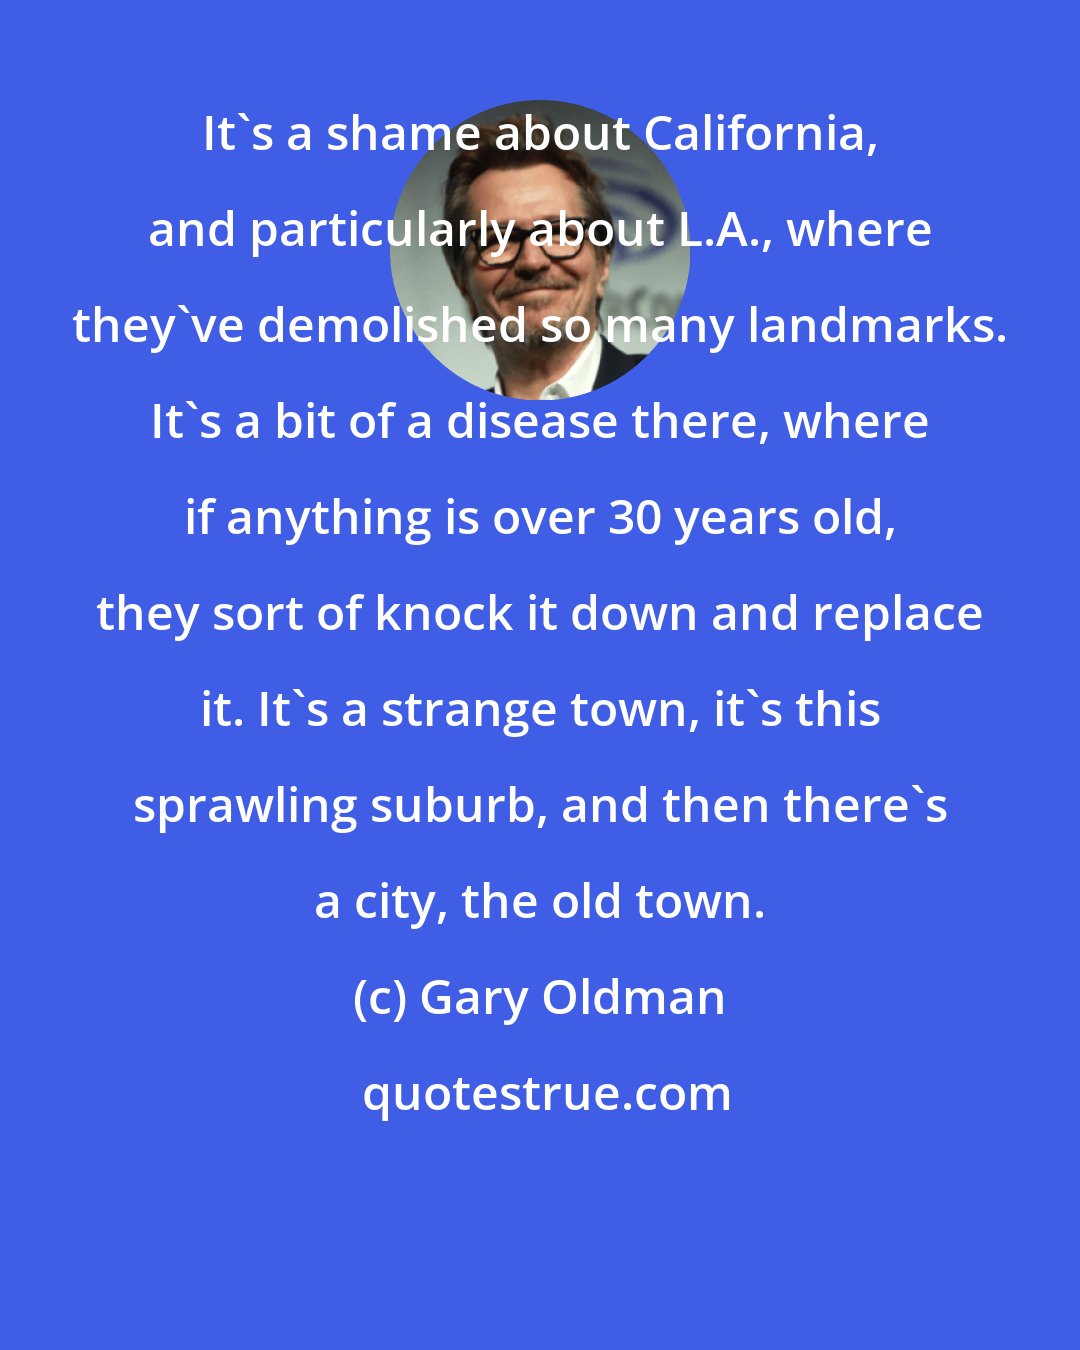 Gary Oldman: It's a shame about California, and particularly about L.A., where they've demolished so many landmarks. It's a bit of a disease there, where if anything is over 30 years old, they sort of knock it down and replace it. It's a strange town, it's this sprawling suburb, and then there's a city, the old town.